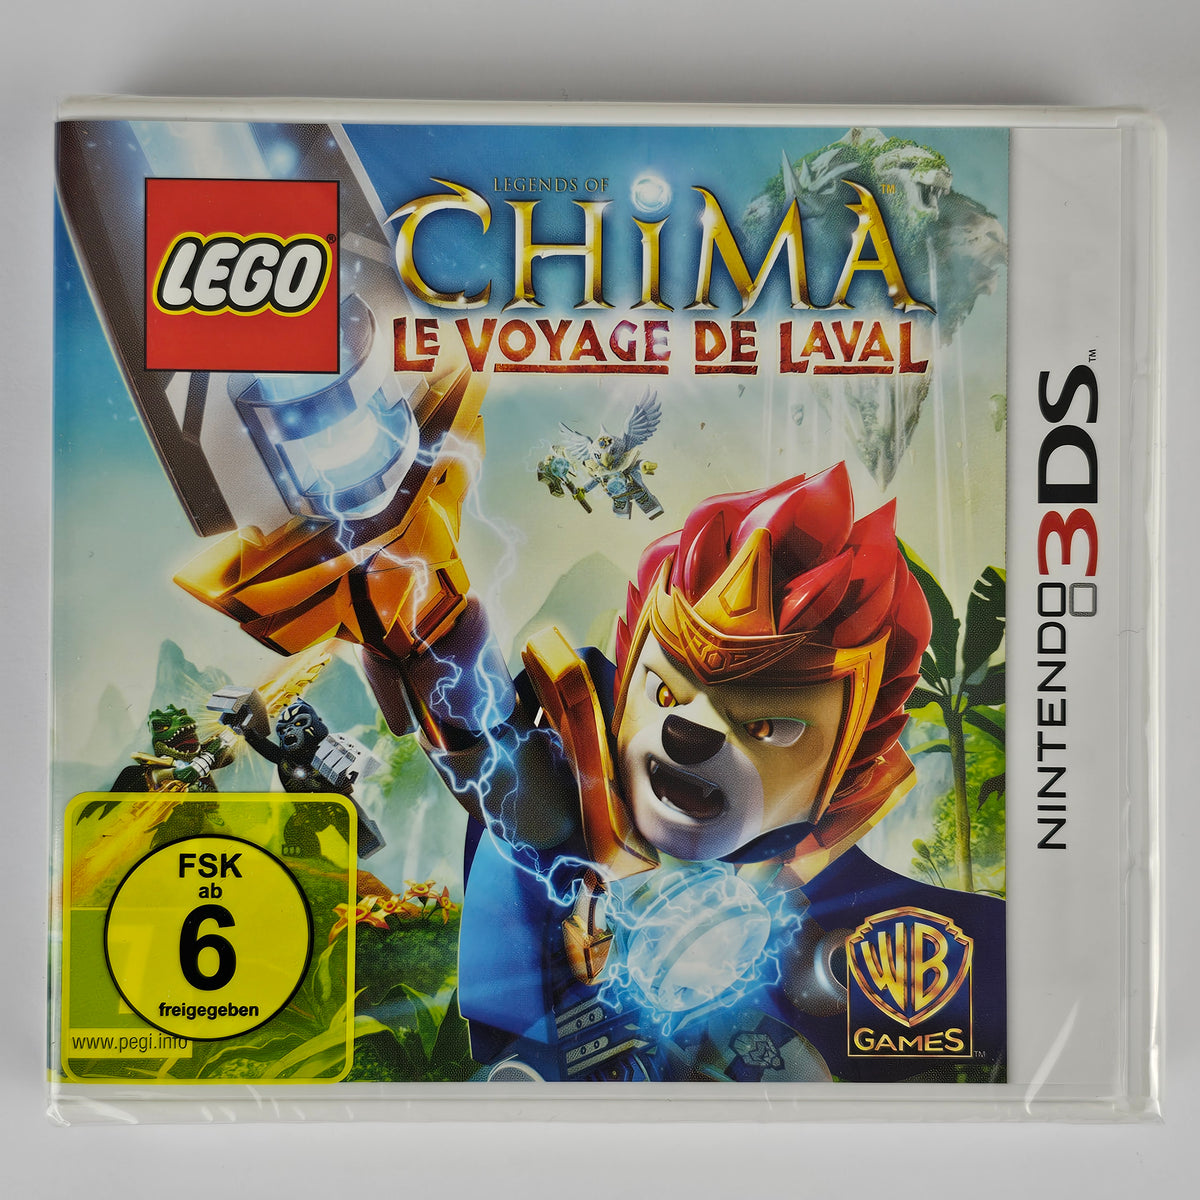 LEGO Legends of Chima Lavals [3DS]